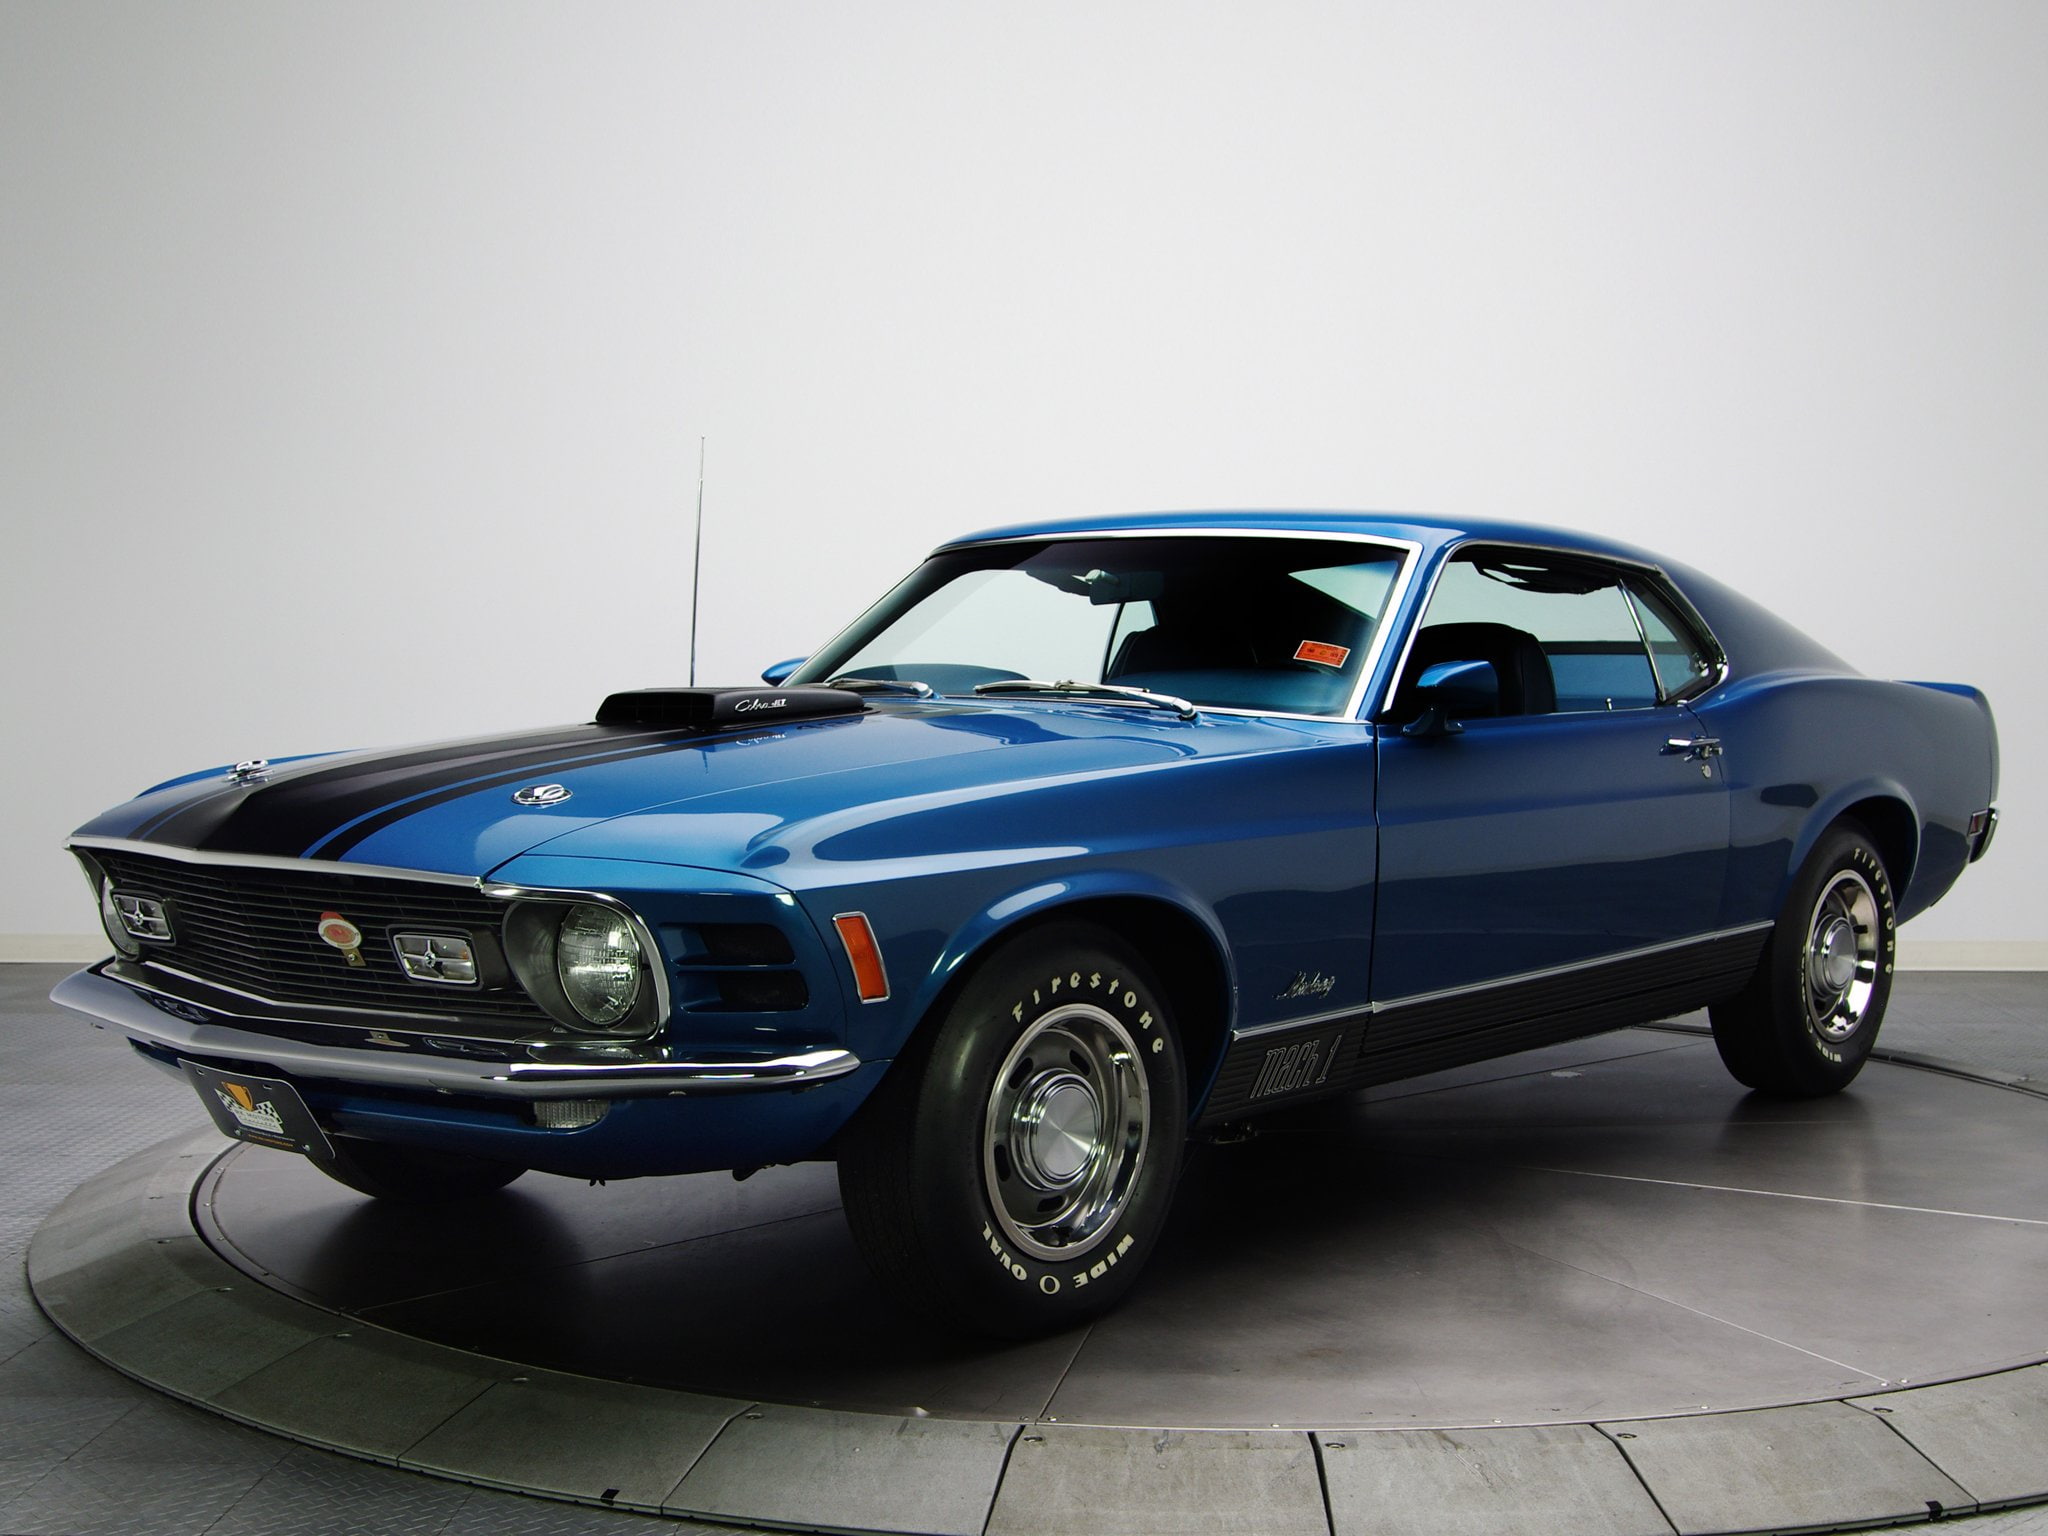 1970, 428, classic, cobra, ford, jet, mach 1, muscle, mustang